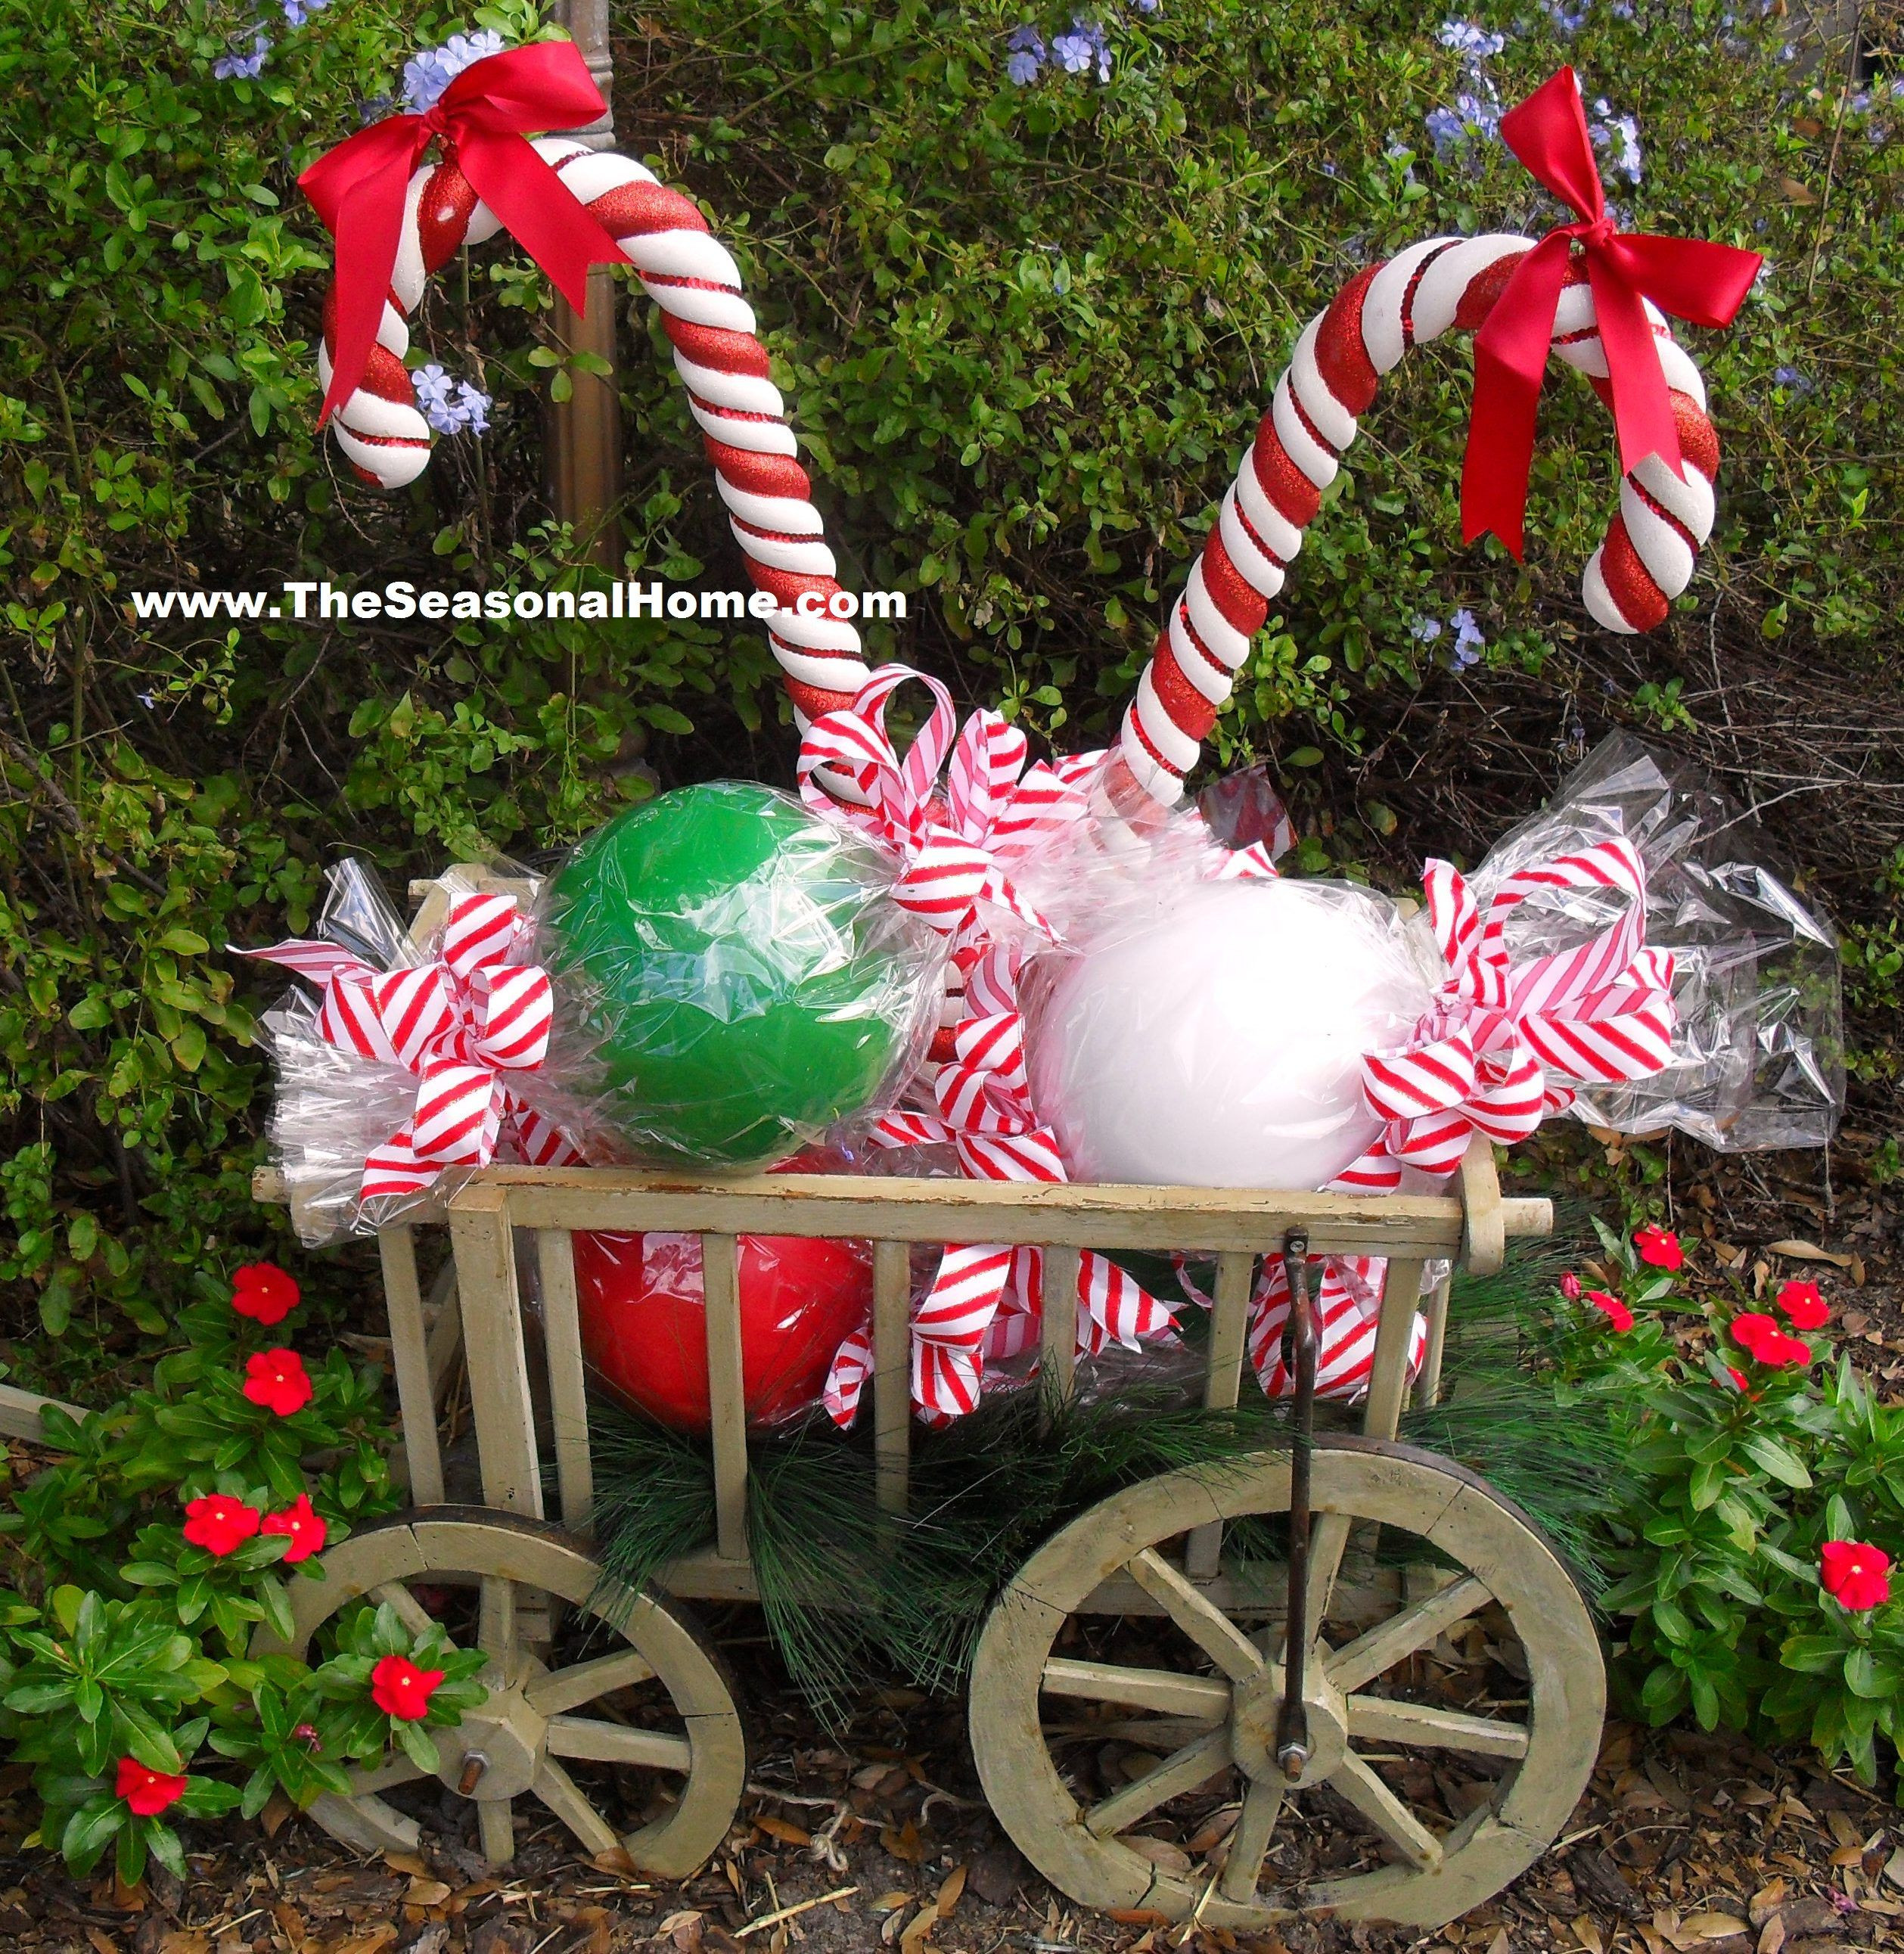 Outdoor Christmas Candy Decorations
 HOW TO DIY Outdoor Candy on The Seasonal Home blog